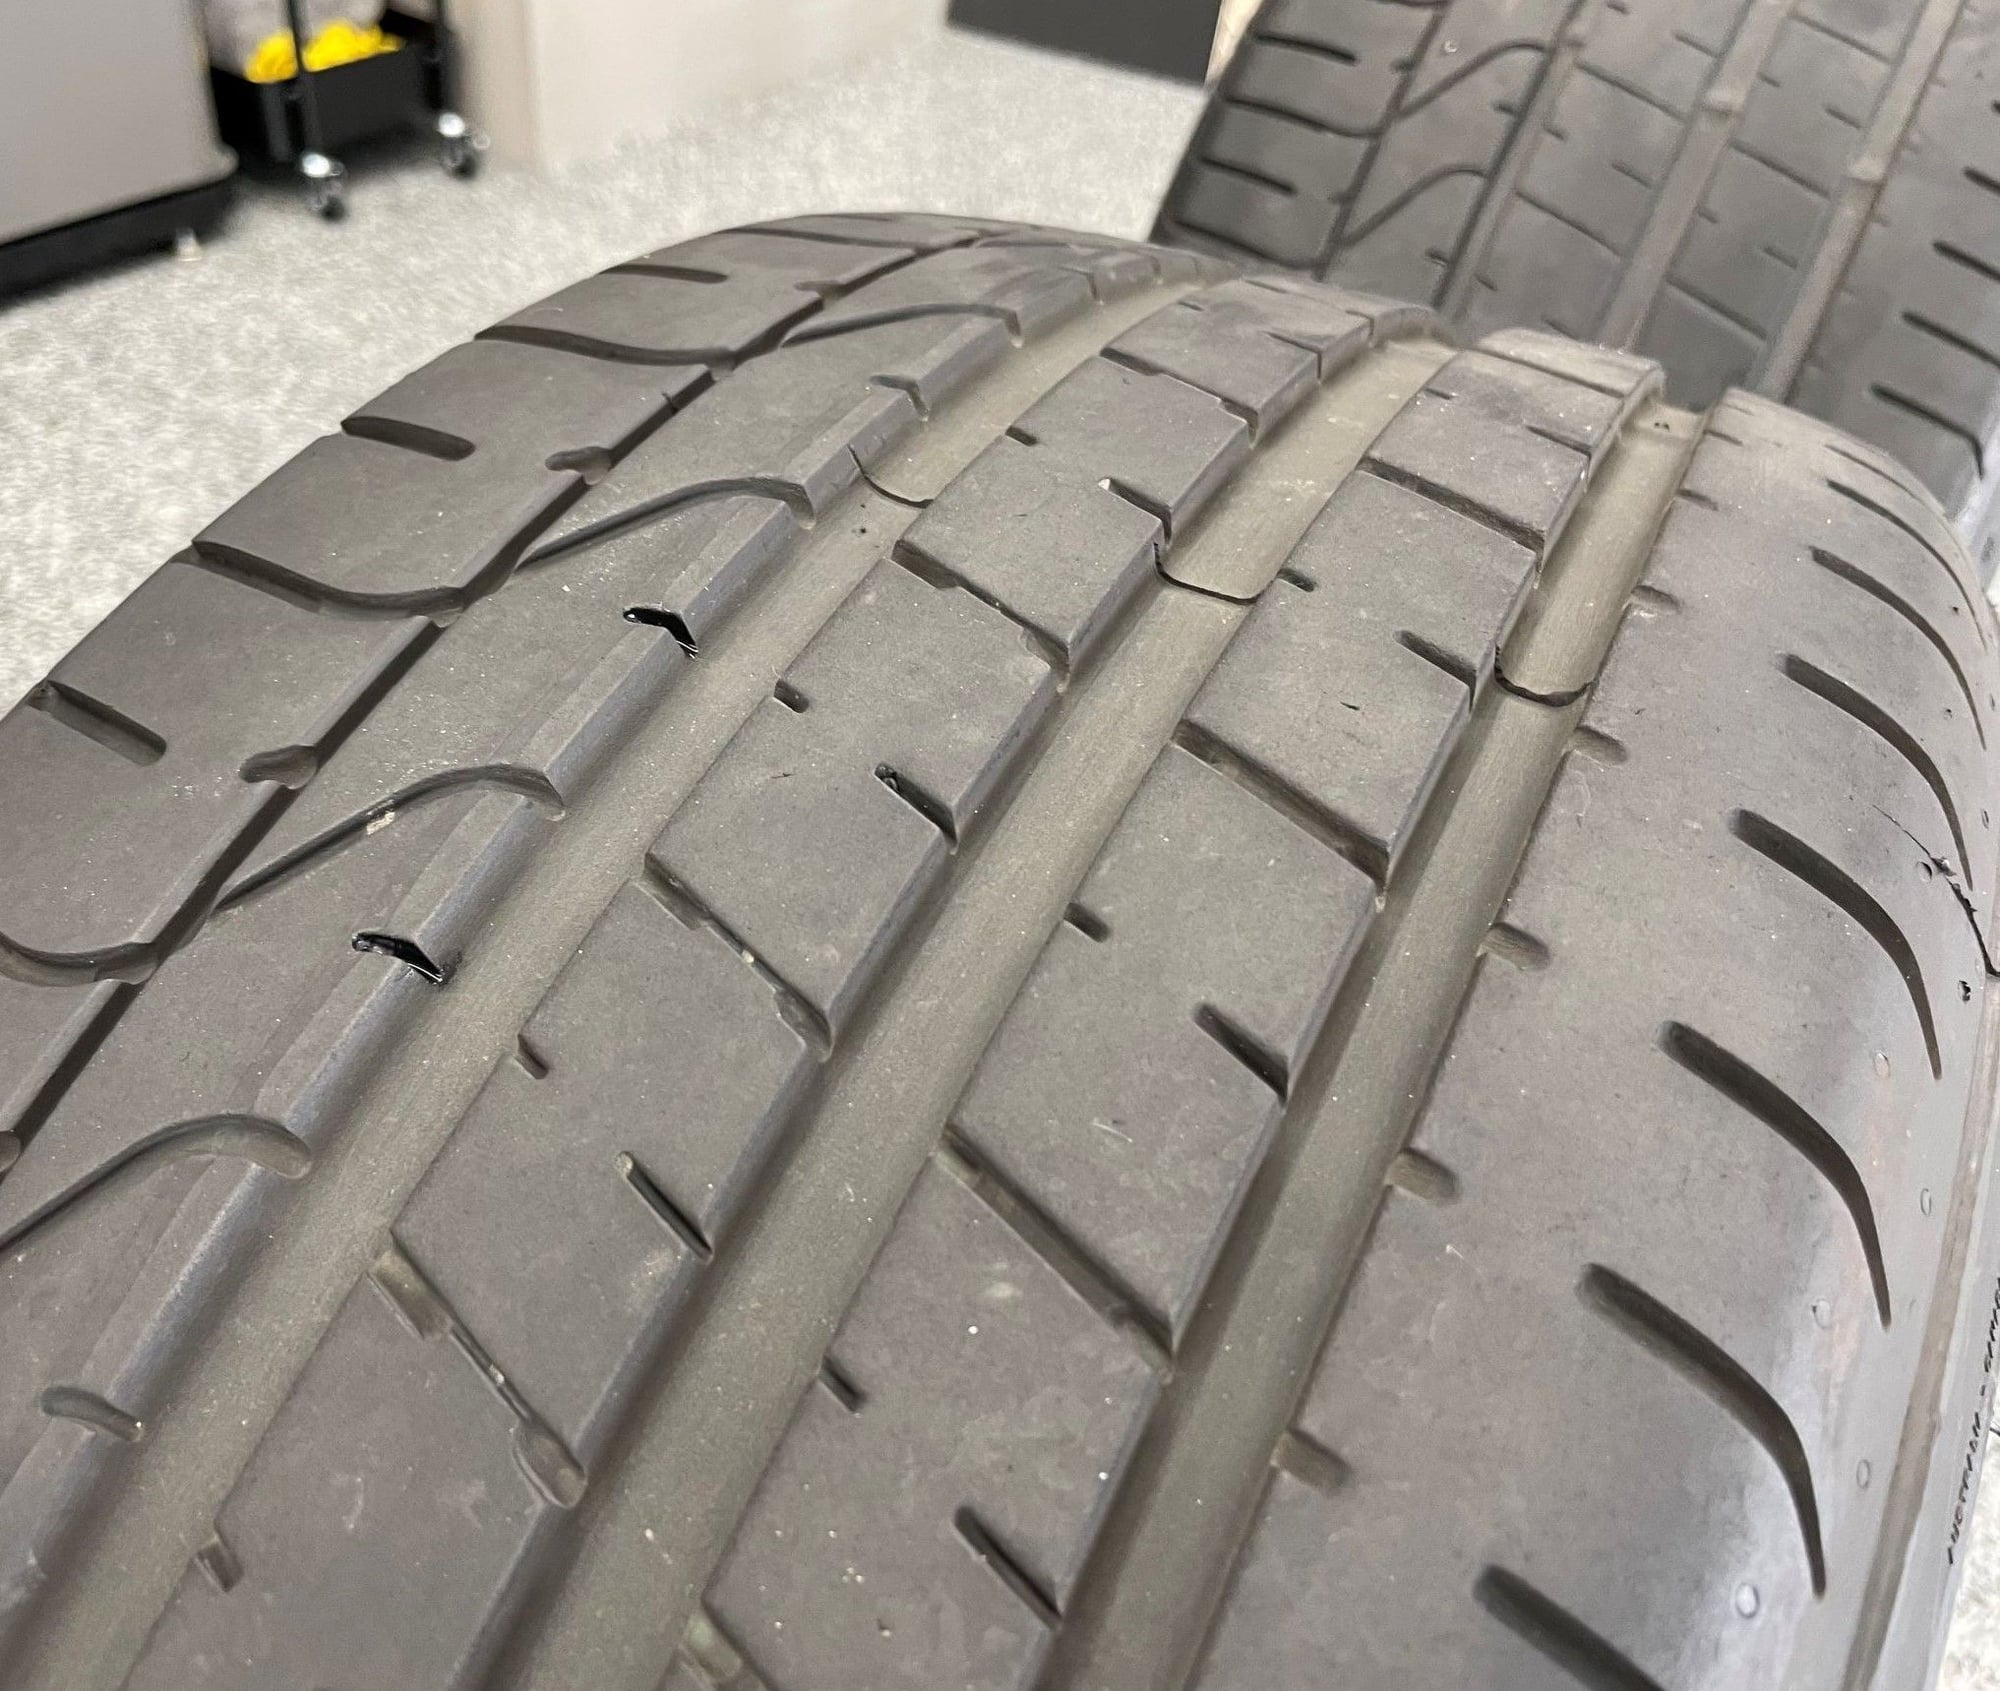 Wheels and Tires/Axles - Mint Condition OEM 991.2 Turbo Wheels & Tires - Used - 2017 Porsche 911 - Miami, FL 33145, United States